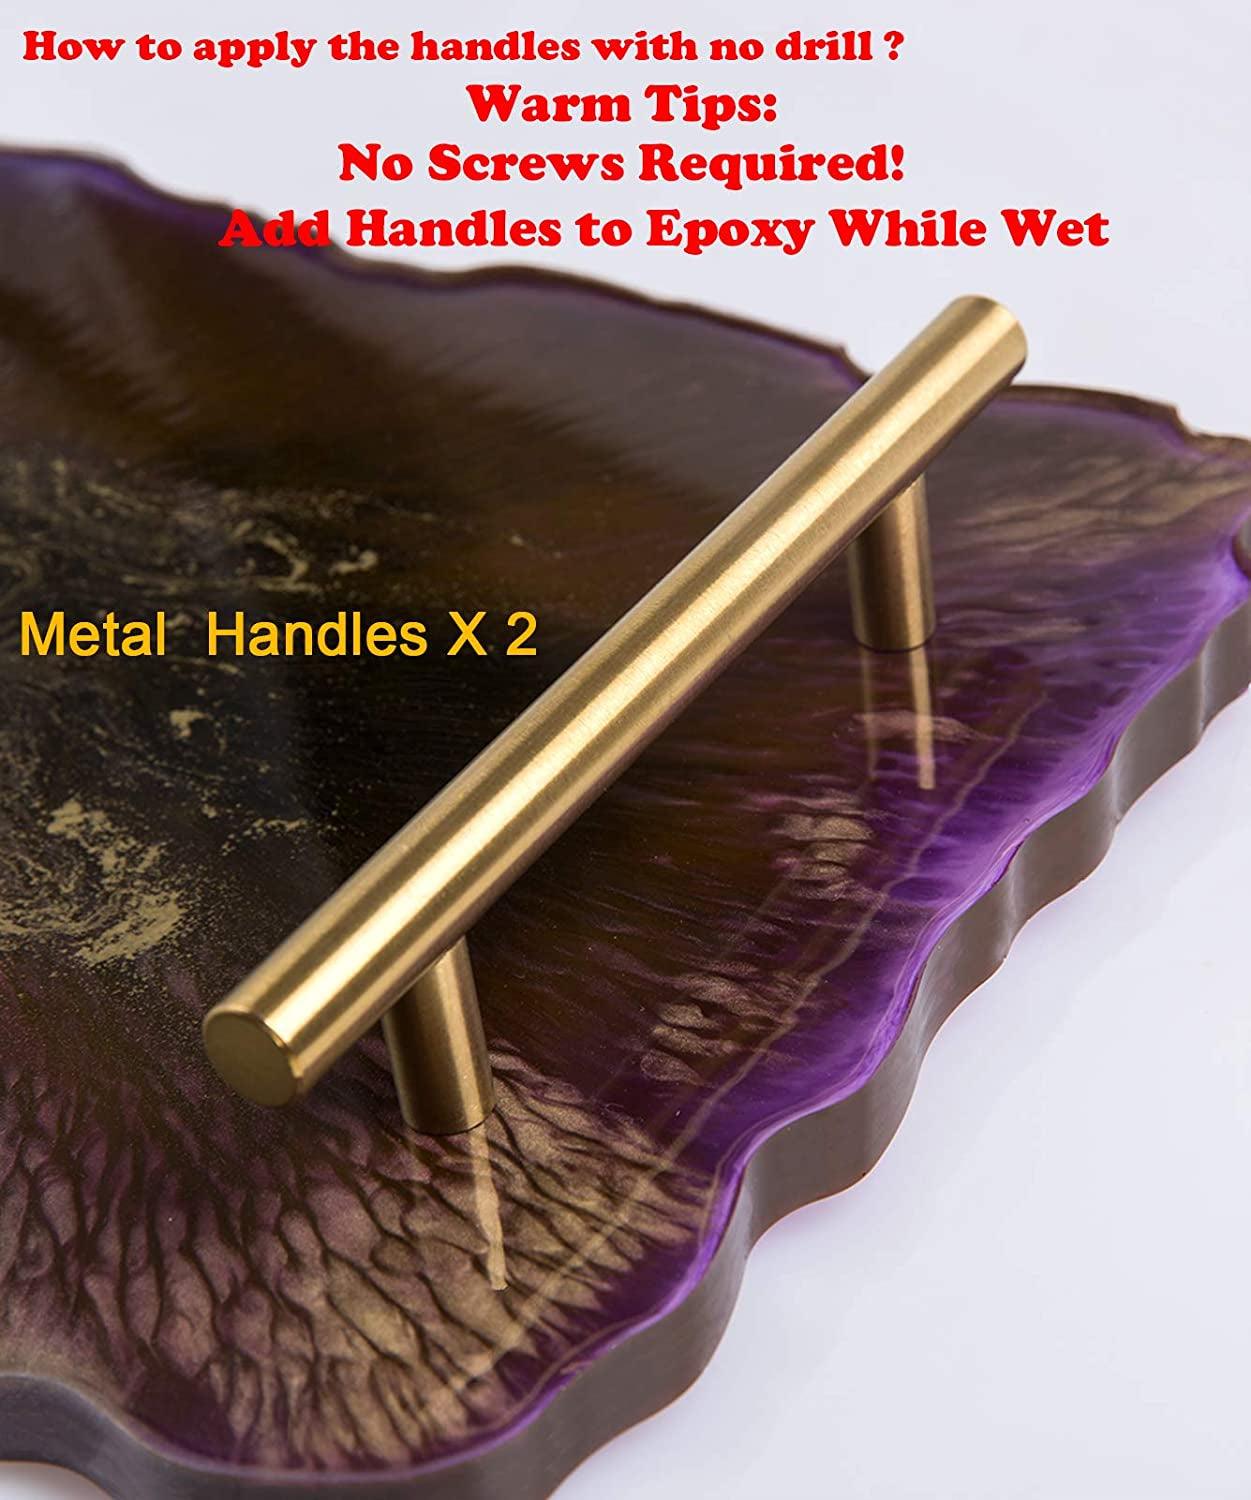 Tray Mold Geode Agate XL Silicone Tray Mold & Gold Handles with A3 Extra Large Silicone Sheet for DIY Crafts, Epoxy Resin Casting Molds for Making Faux Agate Tray,Serving Board - WoodArtSupply